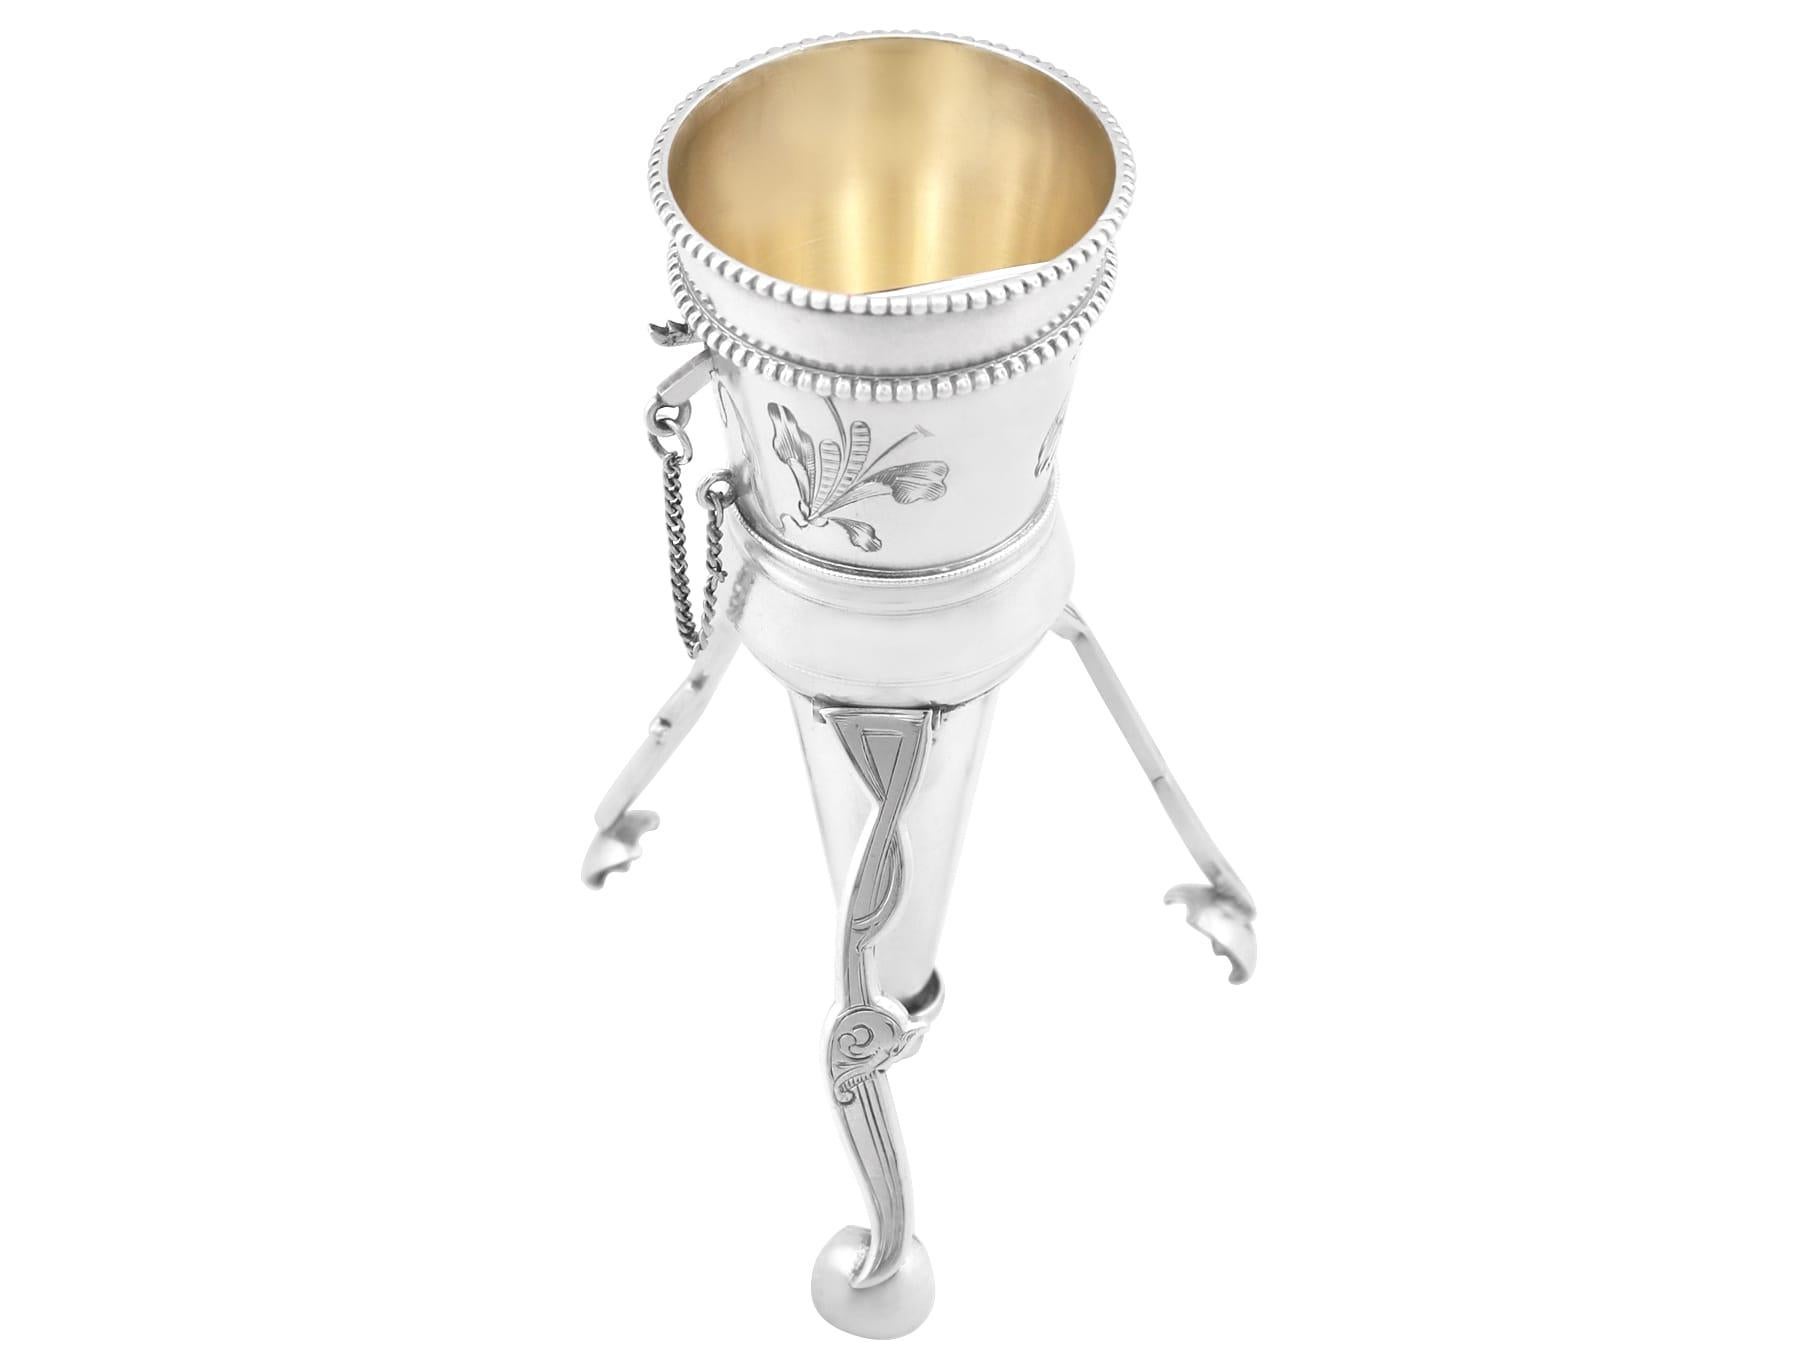 An exceptional, fine and impressive antique Russian silver posy holder; an addition to our ornamental silverware collection.

This exceptional antique Russian silver posy holder has a knopped, conical shaped form onto three legs.

The surface of